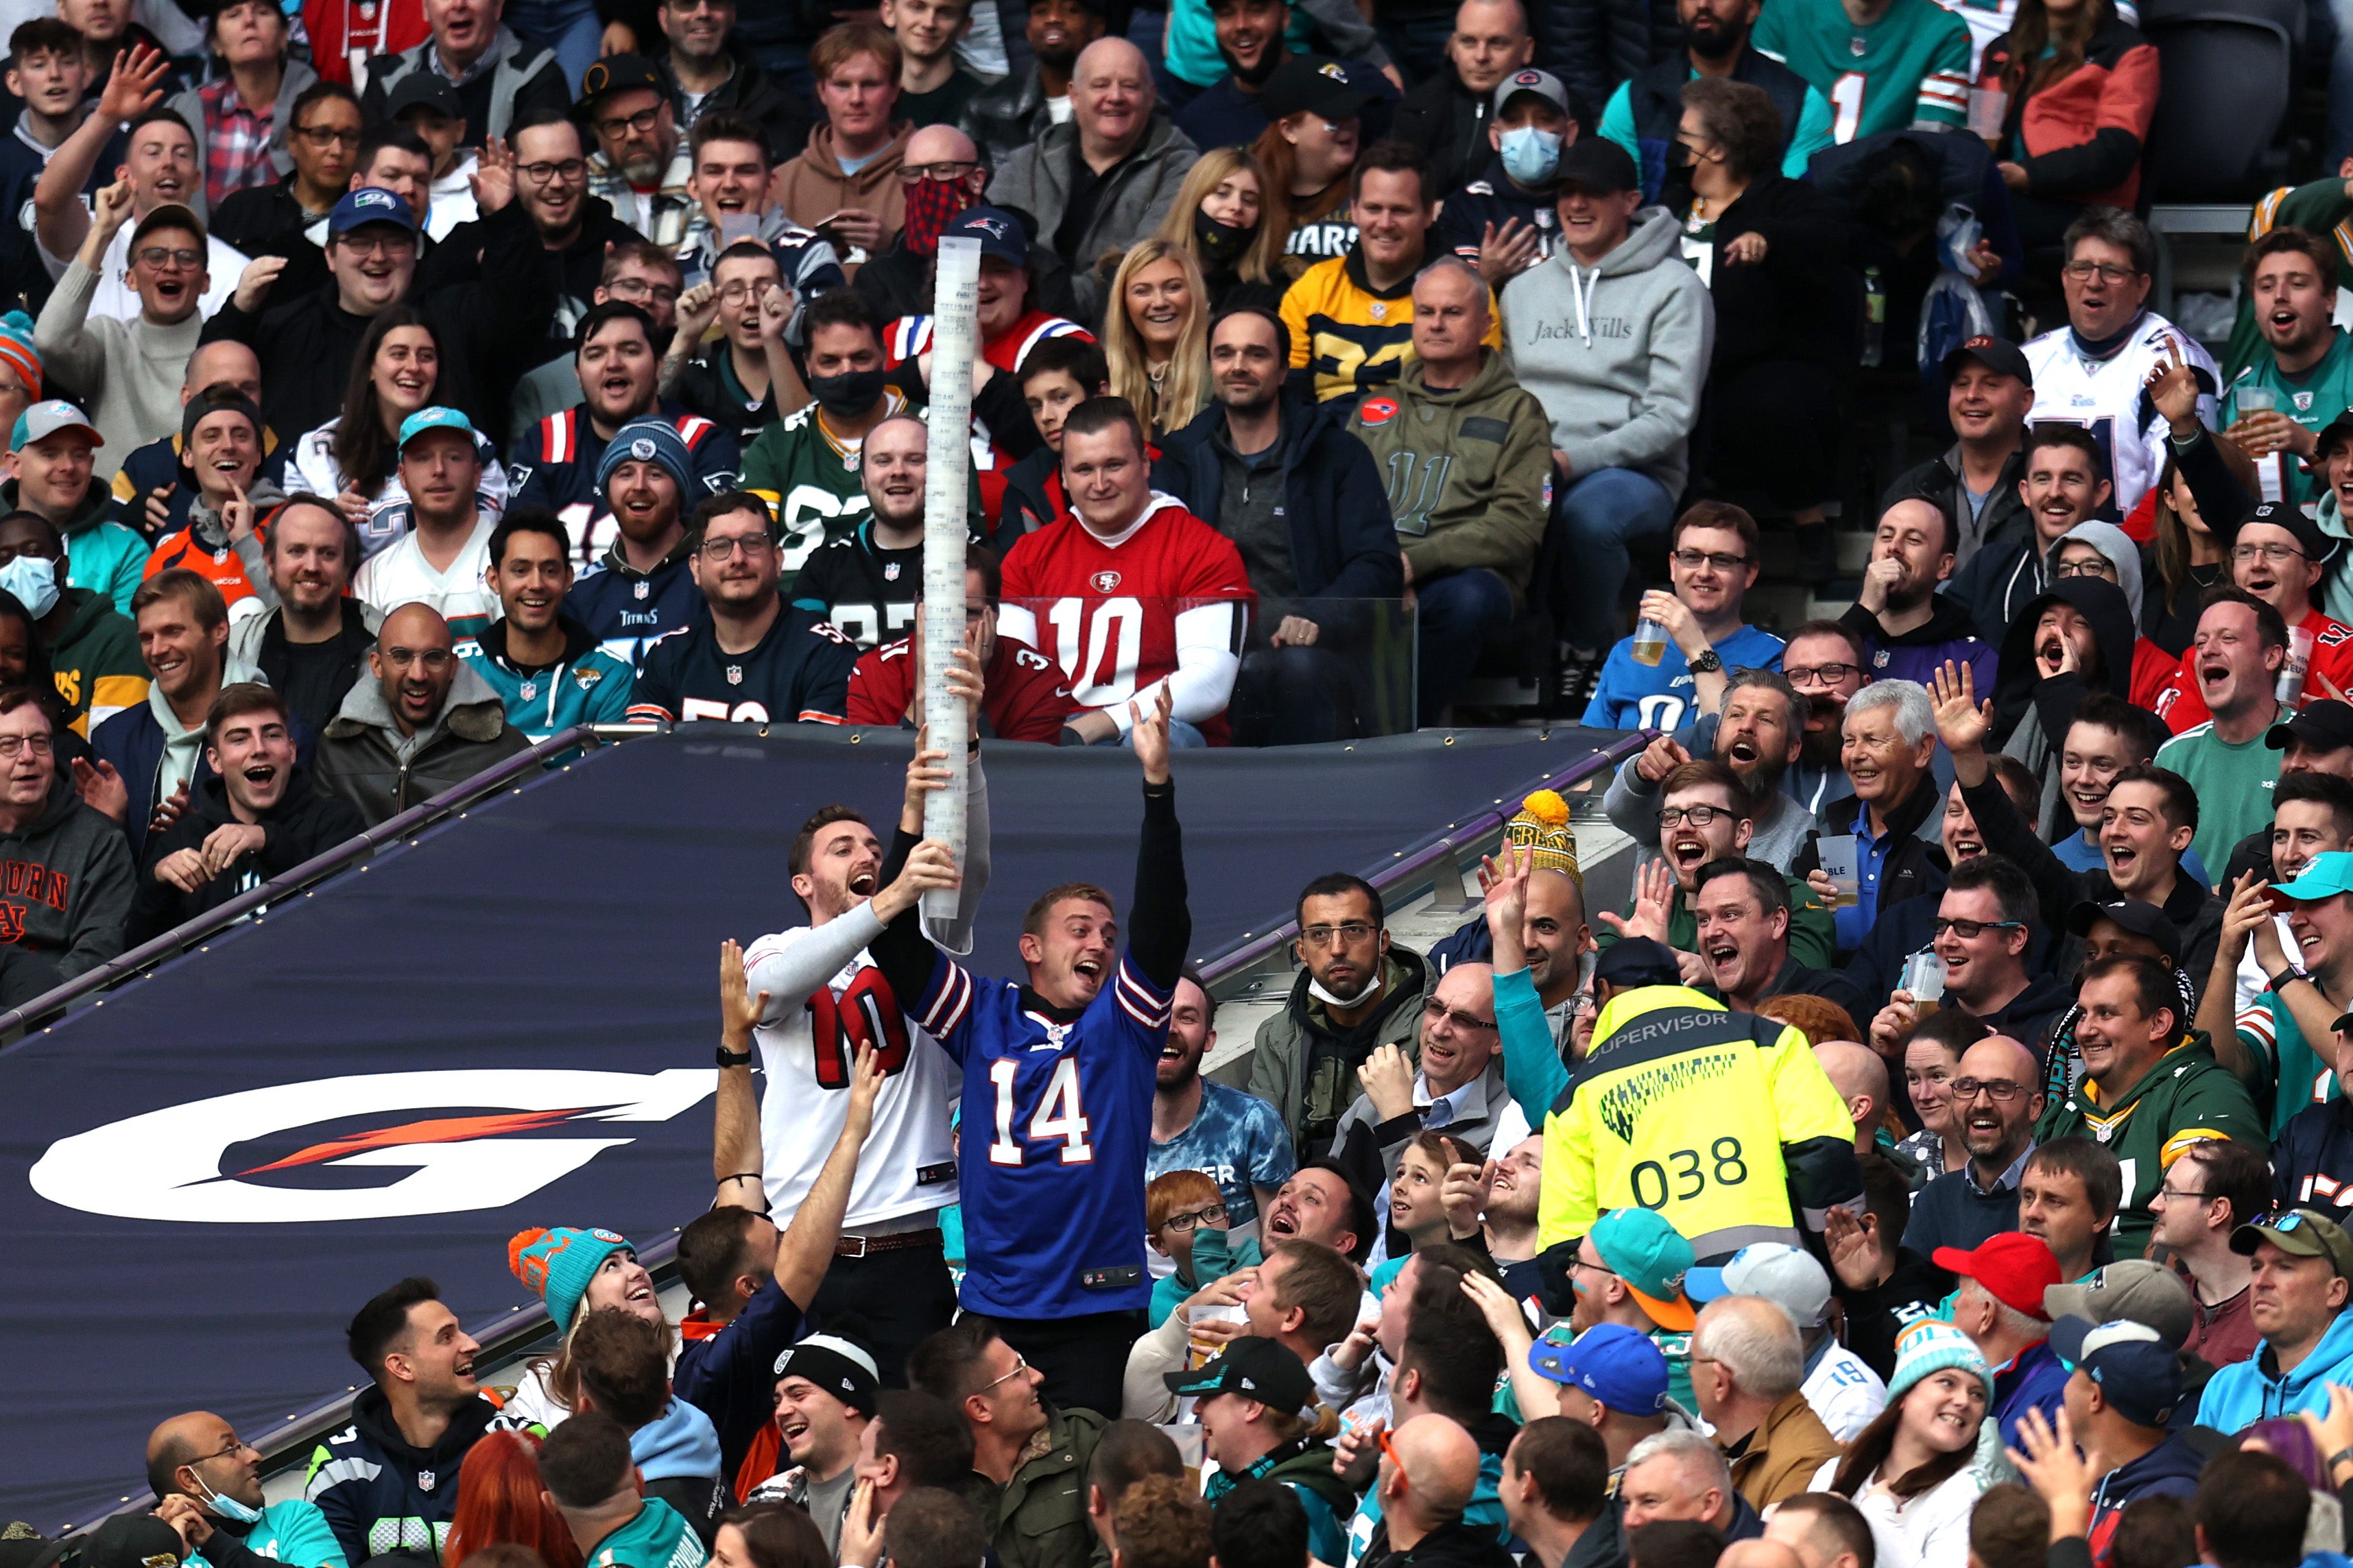 Fans at the 2021 NFL London series